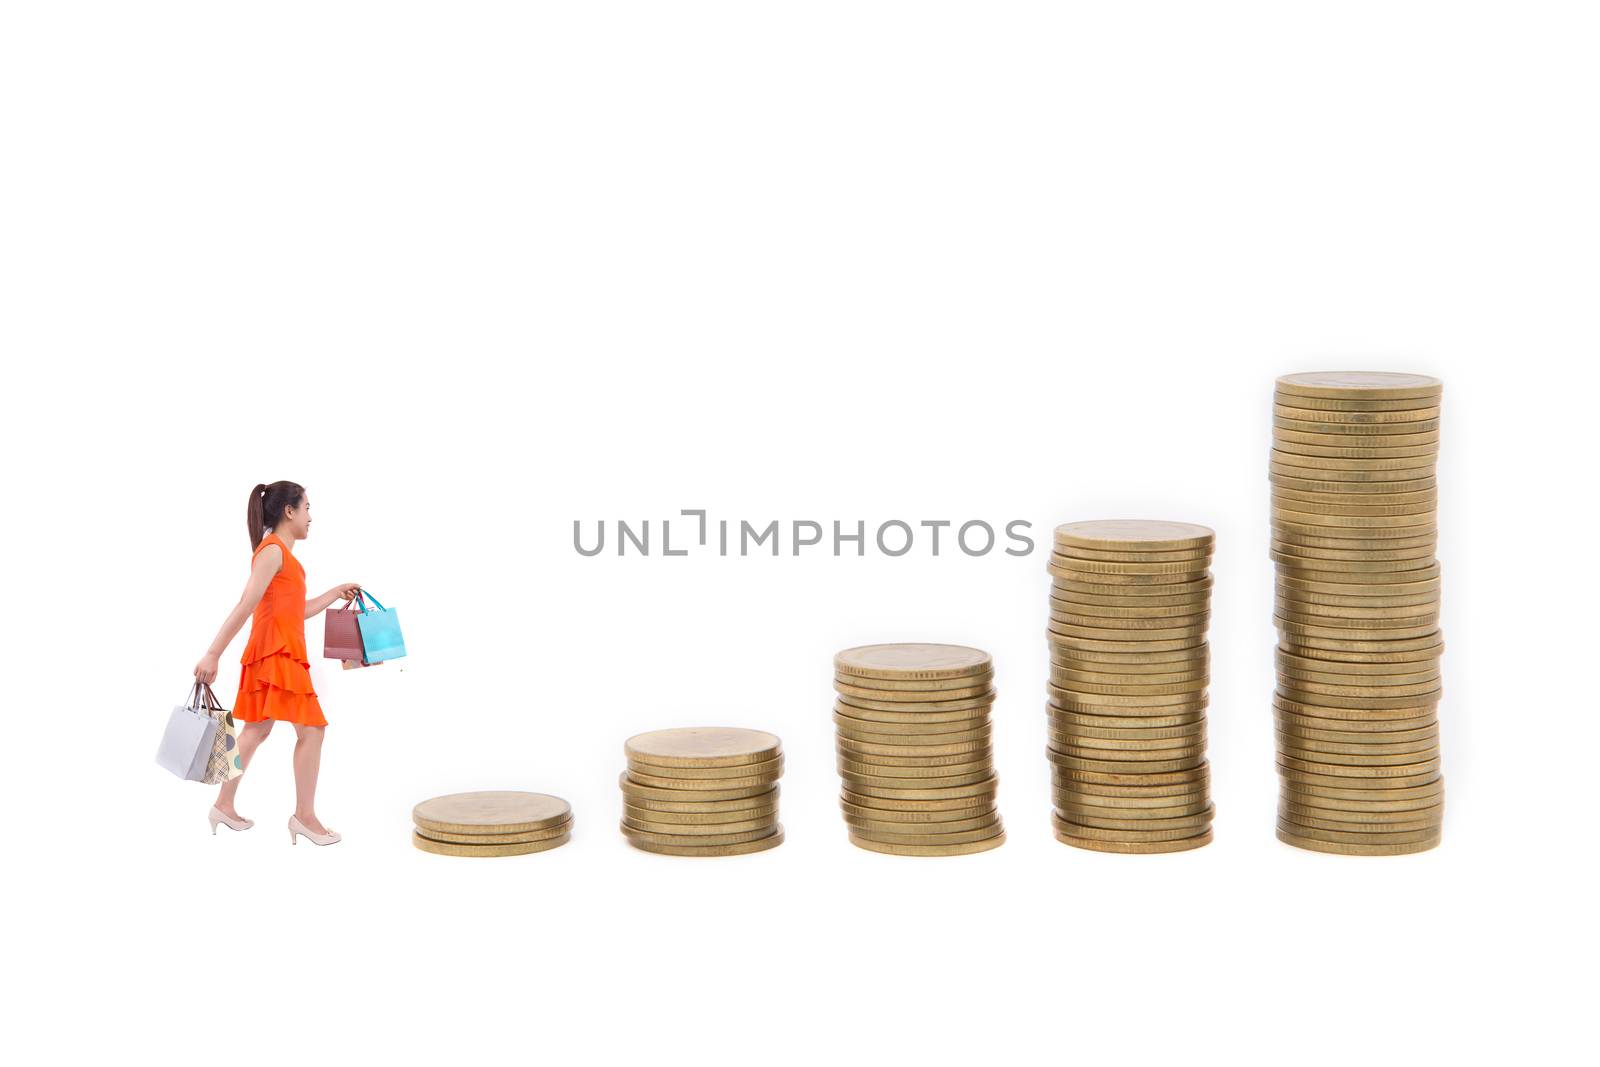 Coins in growth chart, isolated on white background.